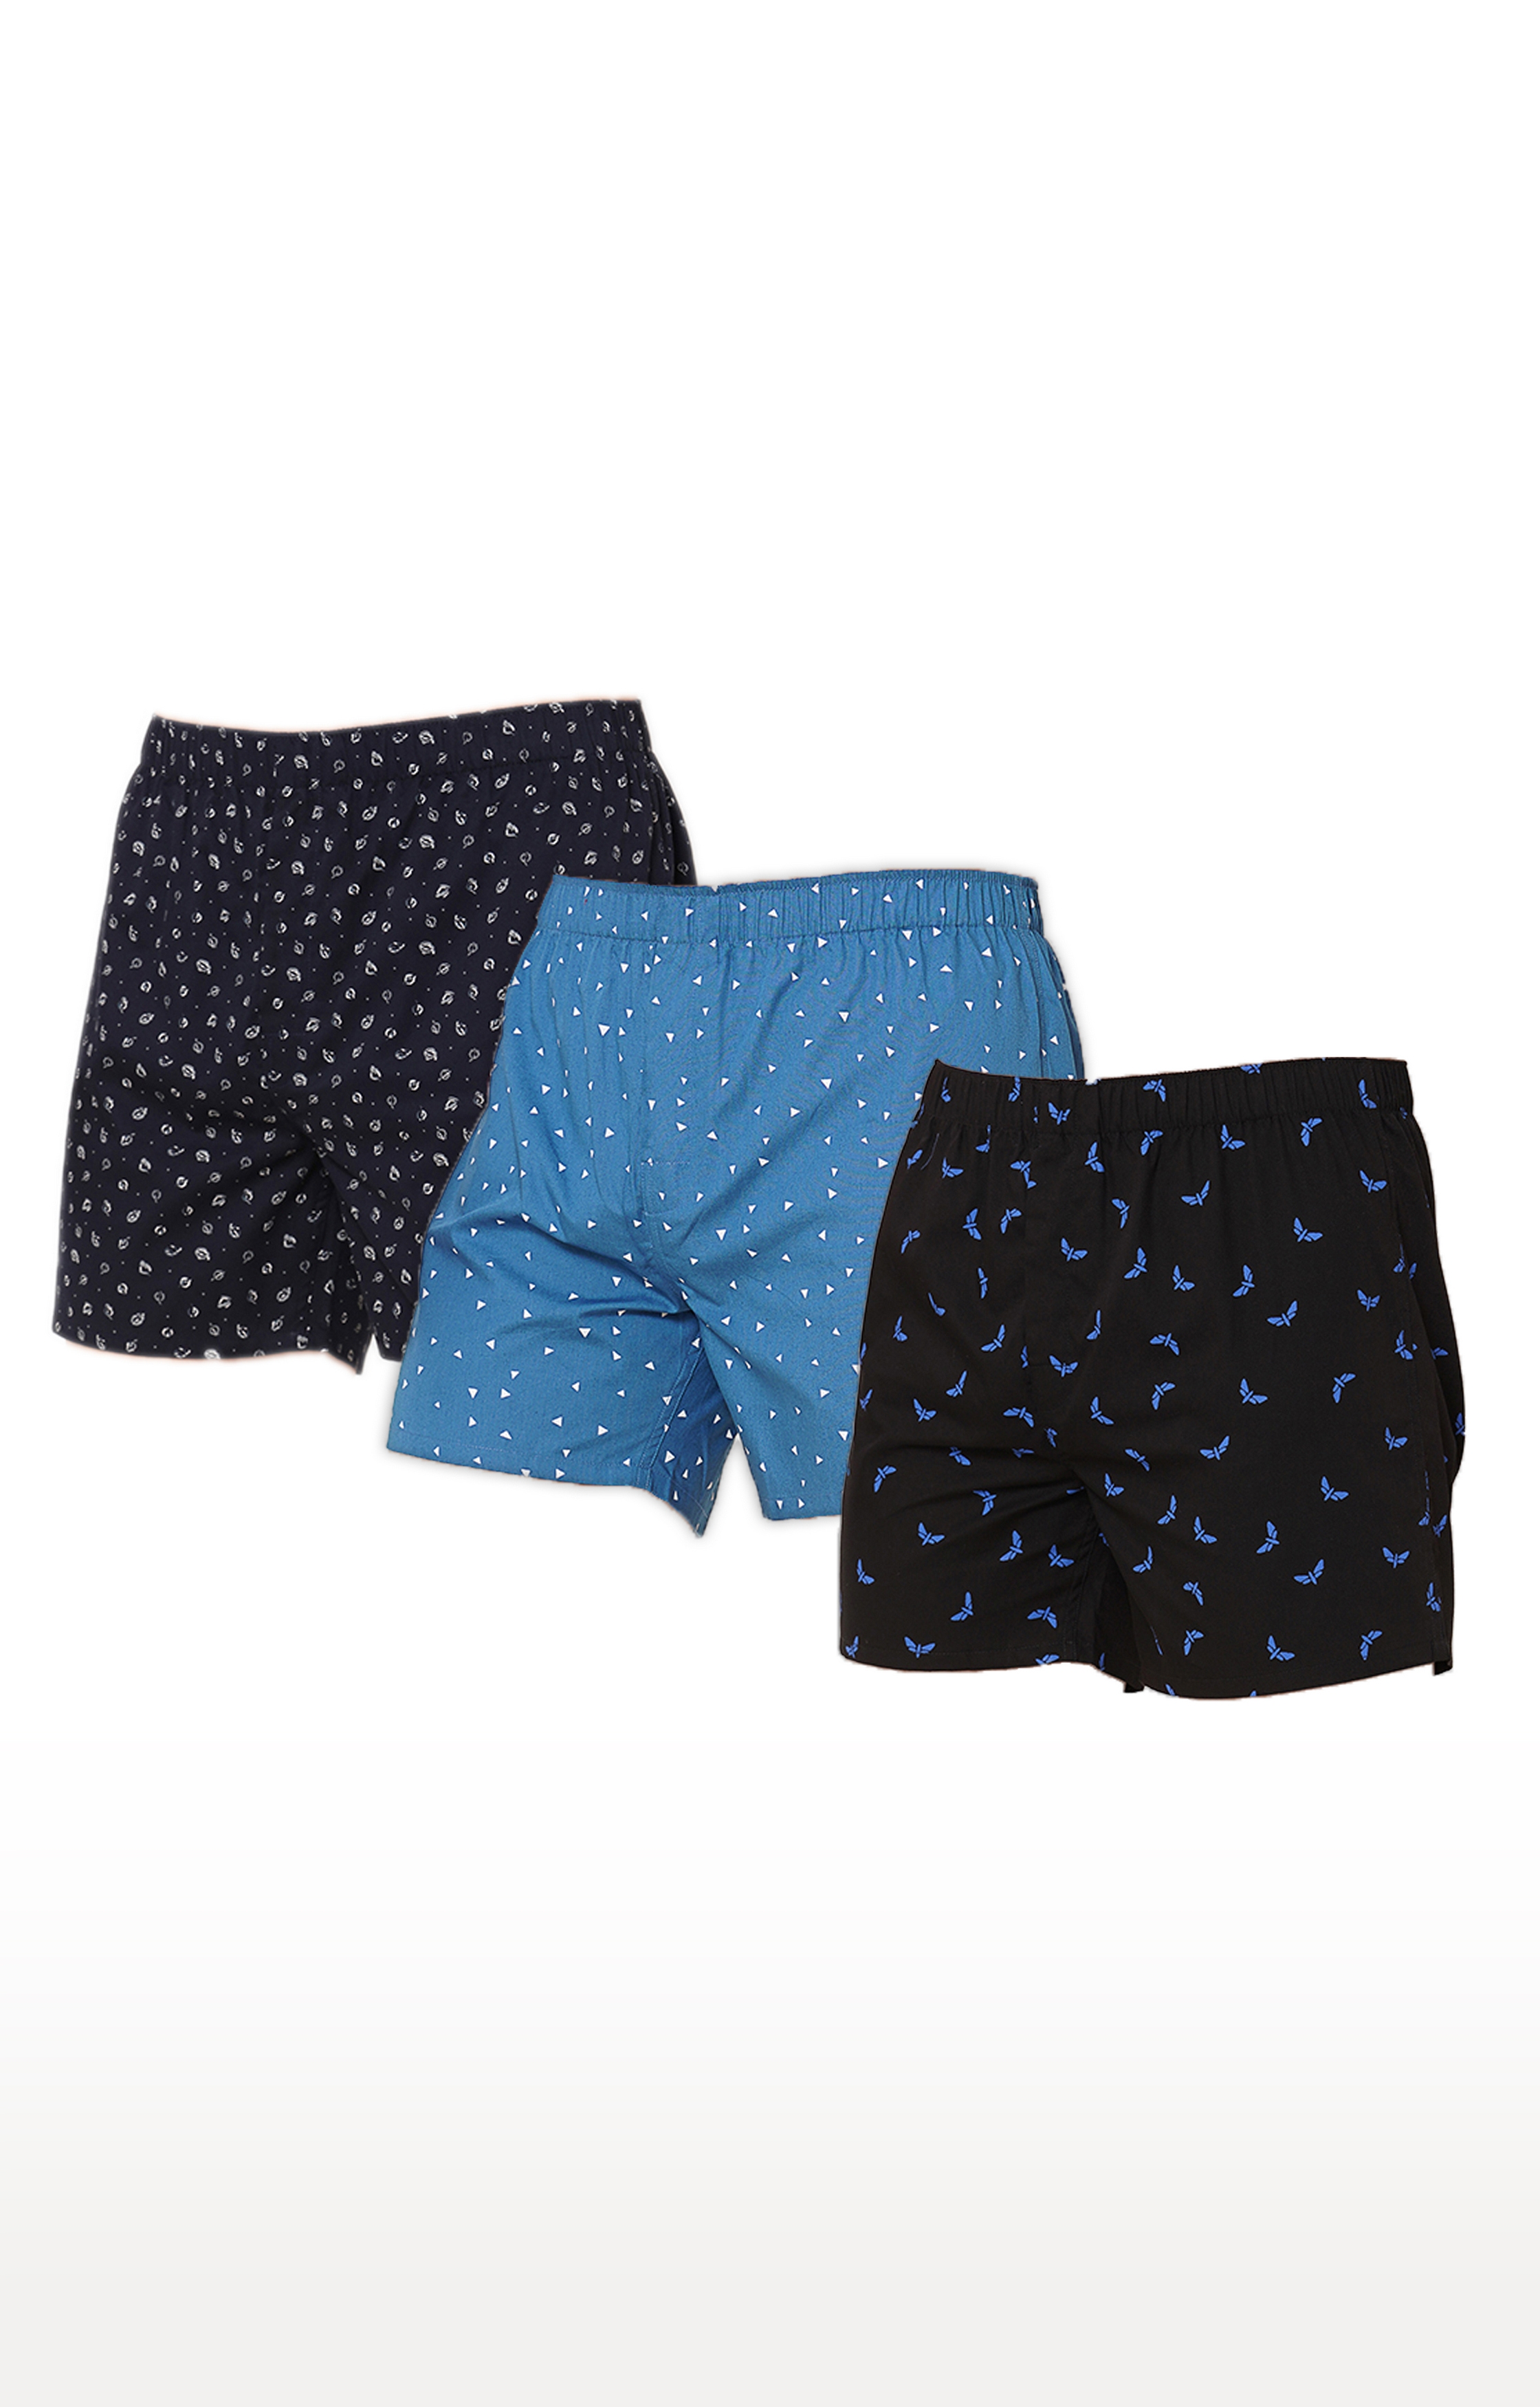 FITZ | Fitz Cotton Regular Fit Printed Boxer Shorts For Men - Pack of 3